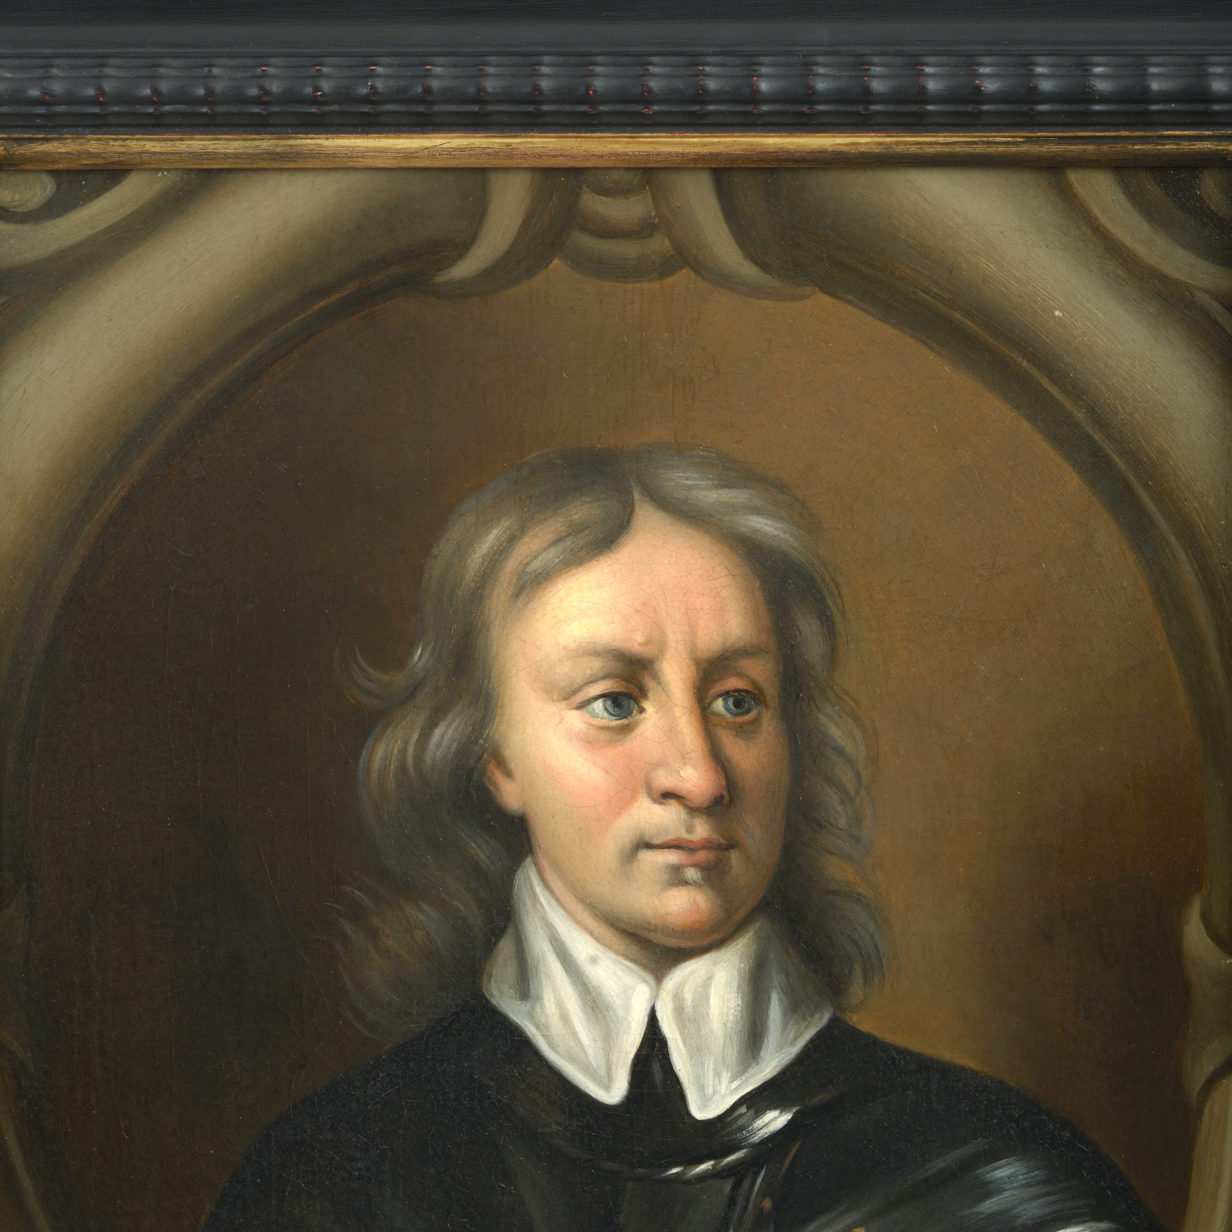 After sir peter lely, 18th century portrait of oliver cromwell